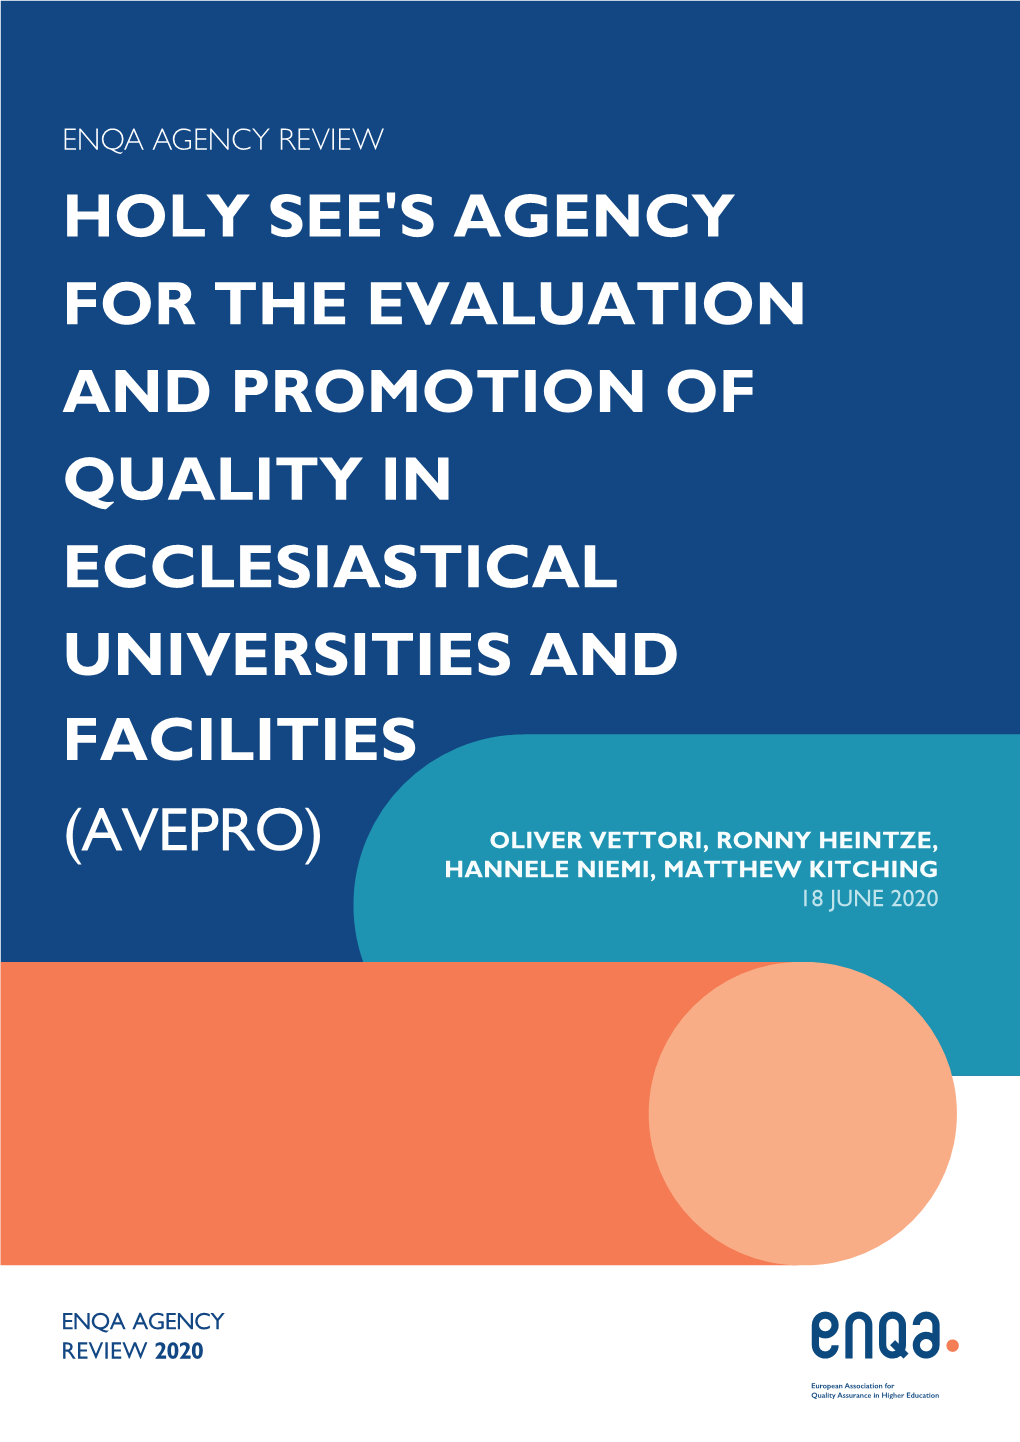 Holy See's Agency for the Evaluation and Promotion of Quality in Ecclesiastical Universities and Facilities (Avepro)